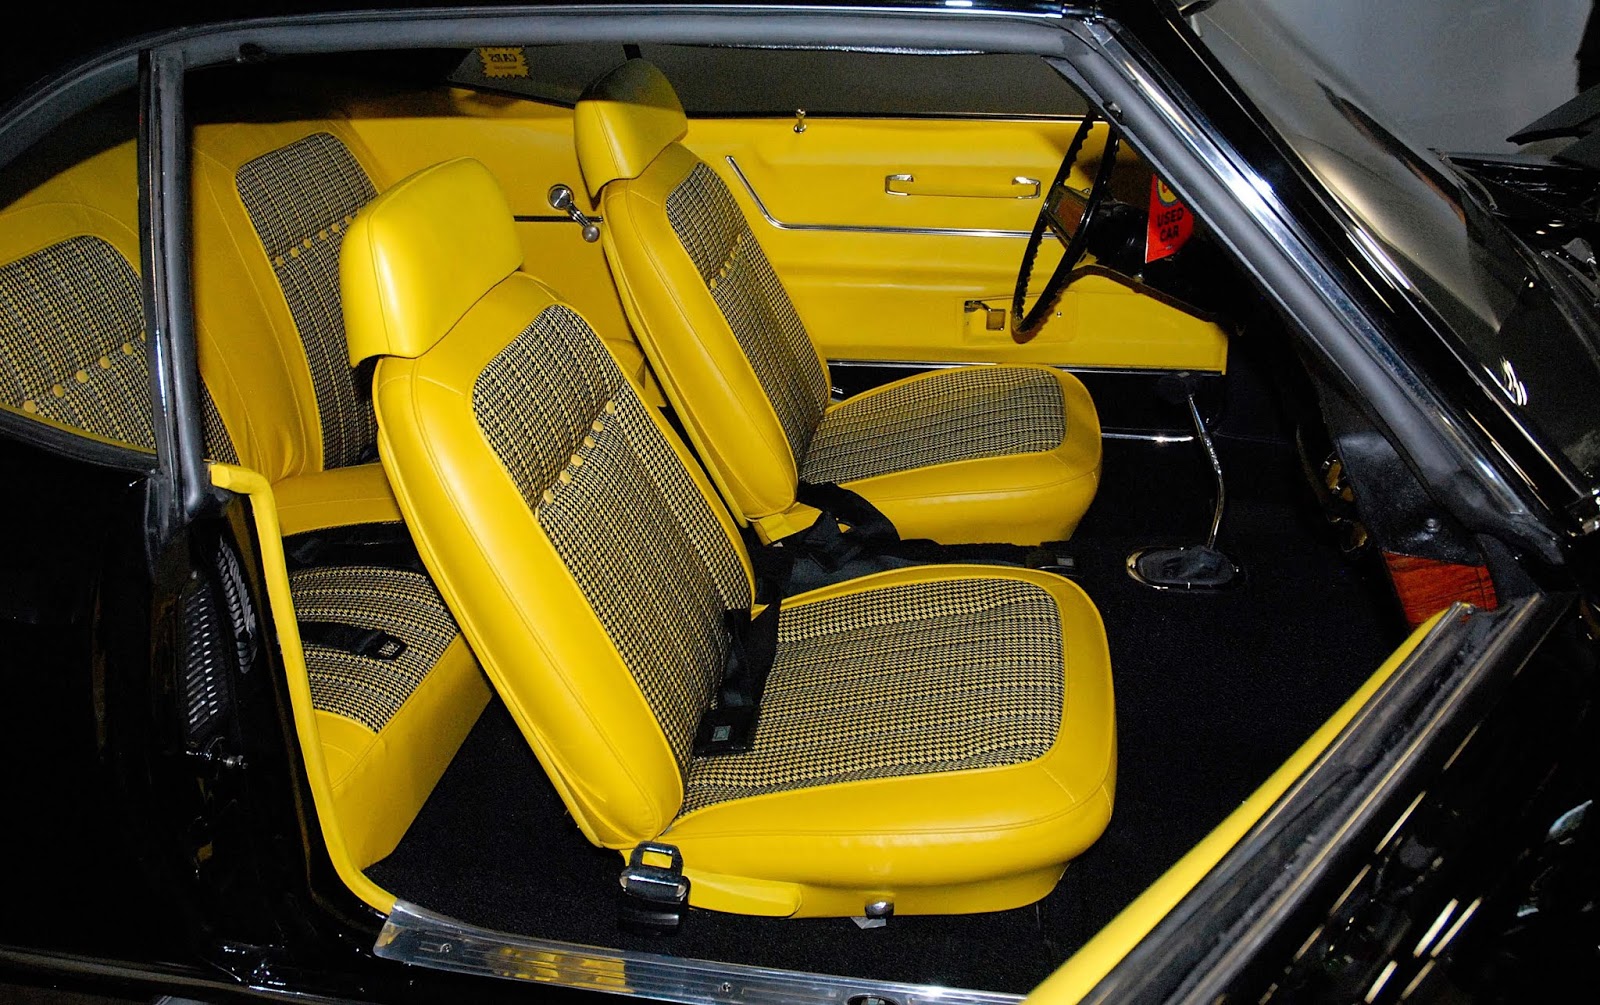 there is only one yellow interior black exterior 1969 427 COPO Camaro. 